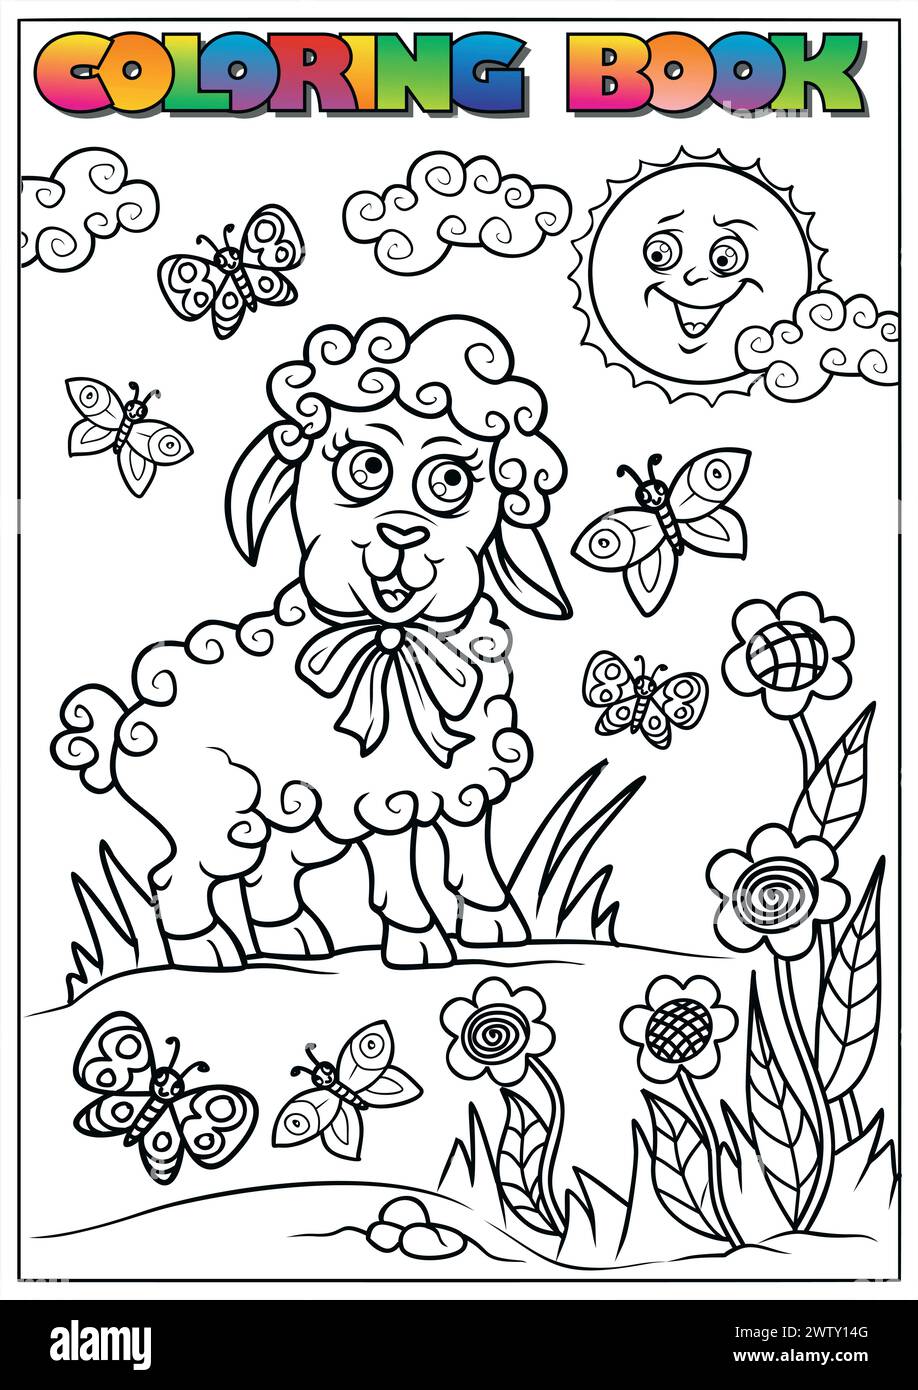 Easter coloring book for children - little lambs are grazing in the meadows Stock Vector